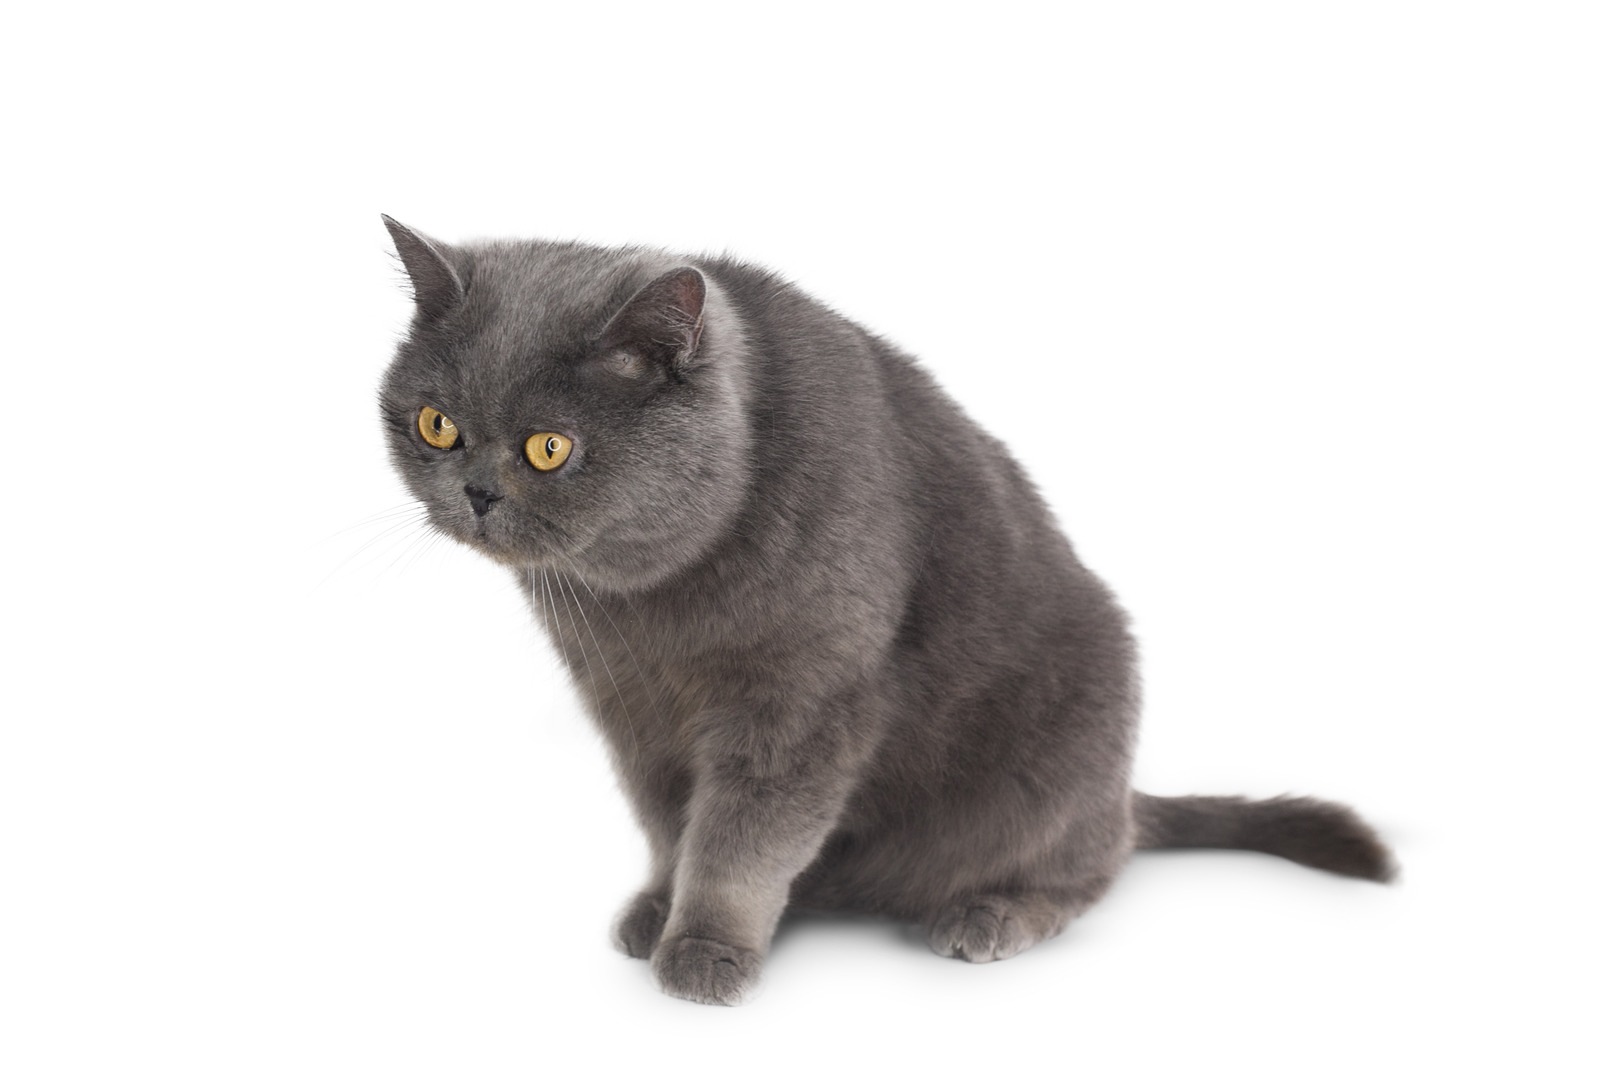 What a nice grey animal cat